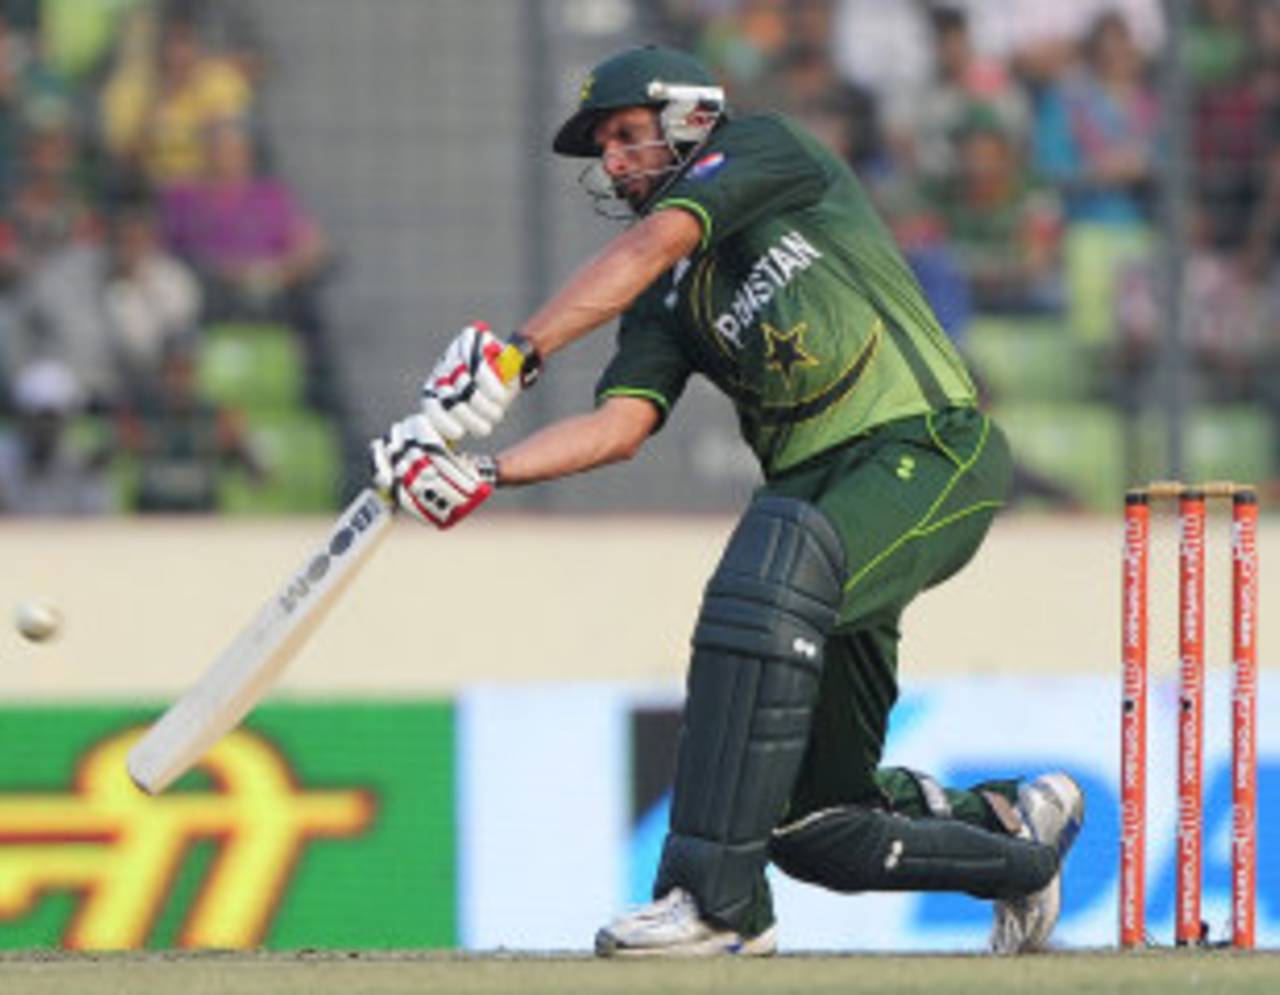 Shahid Afridi, who came up with an all-round display, now has the most match awards among Pakistan players&nbsp;&nbsp;&bull;&nbsp;&nbsp;AFP